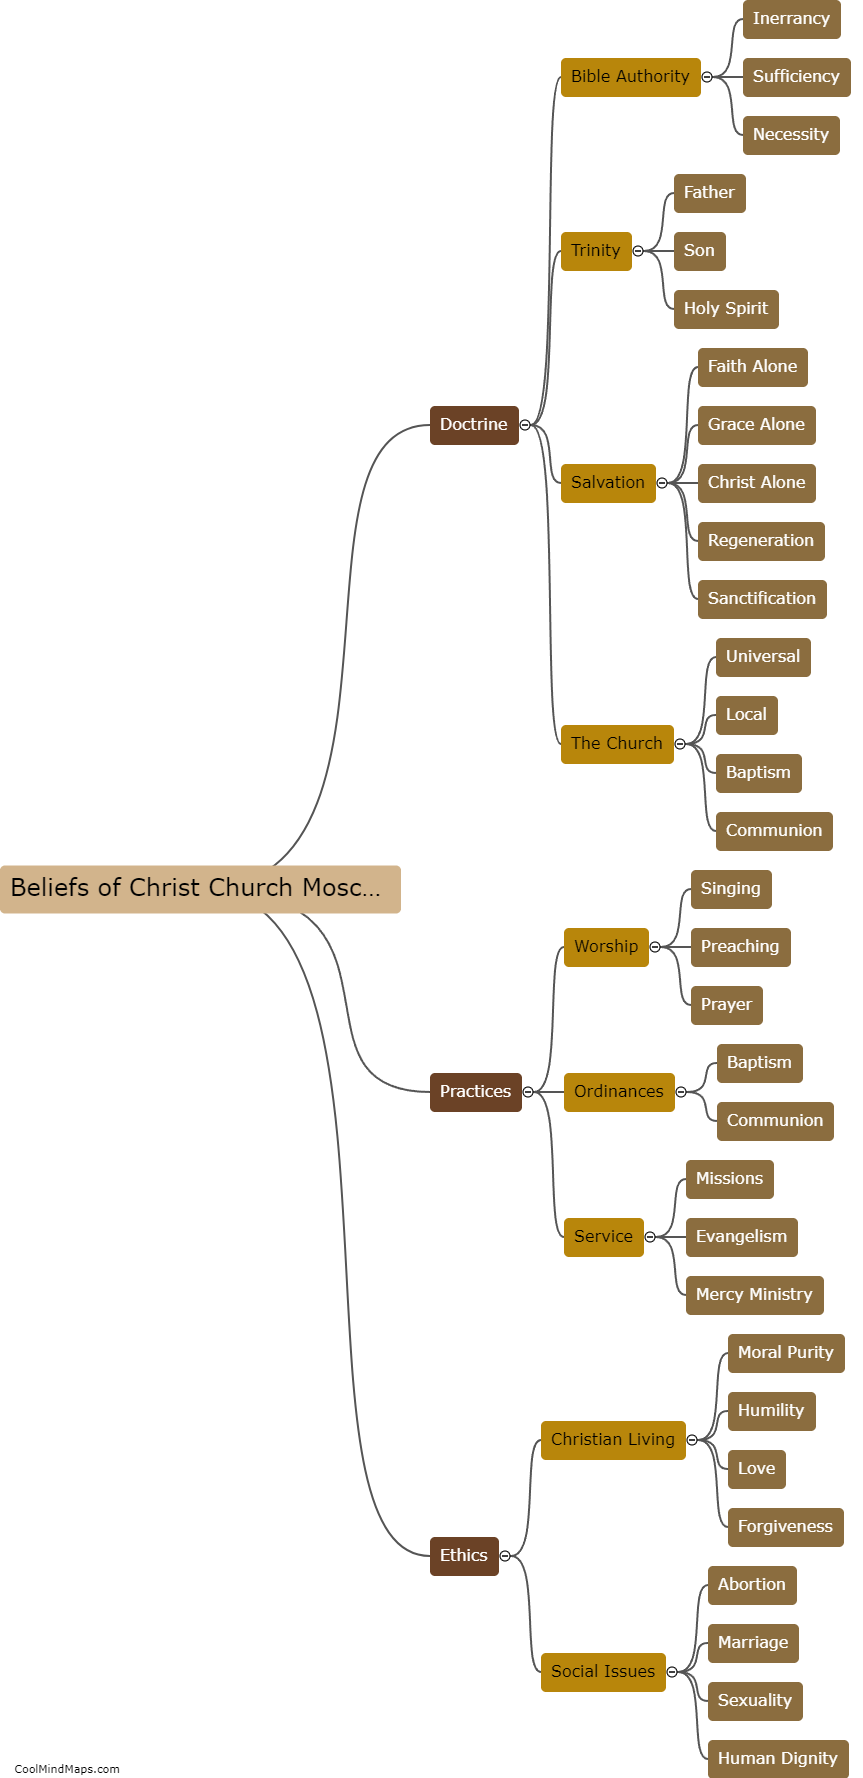 What are the beliefs of Christ Church Moscow?